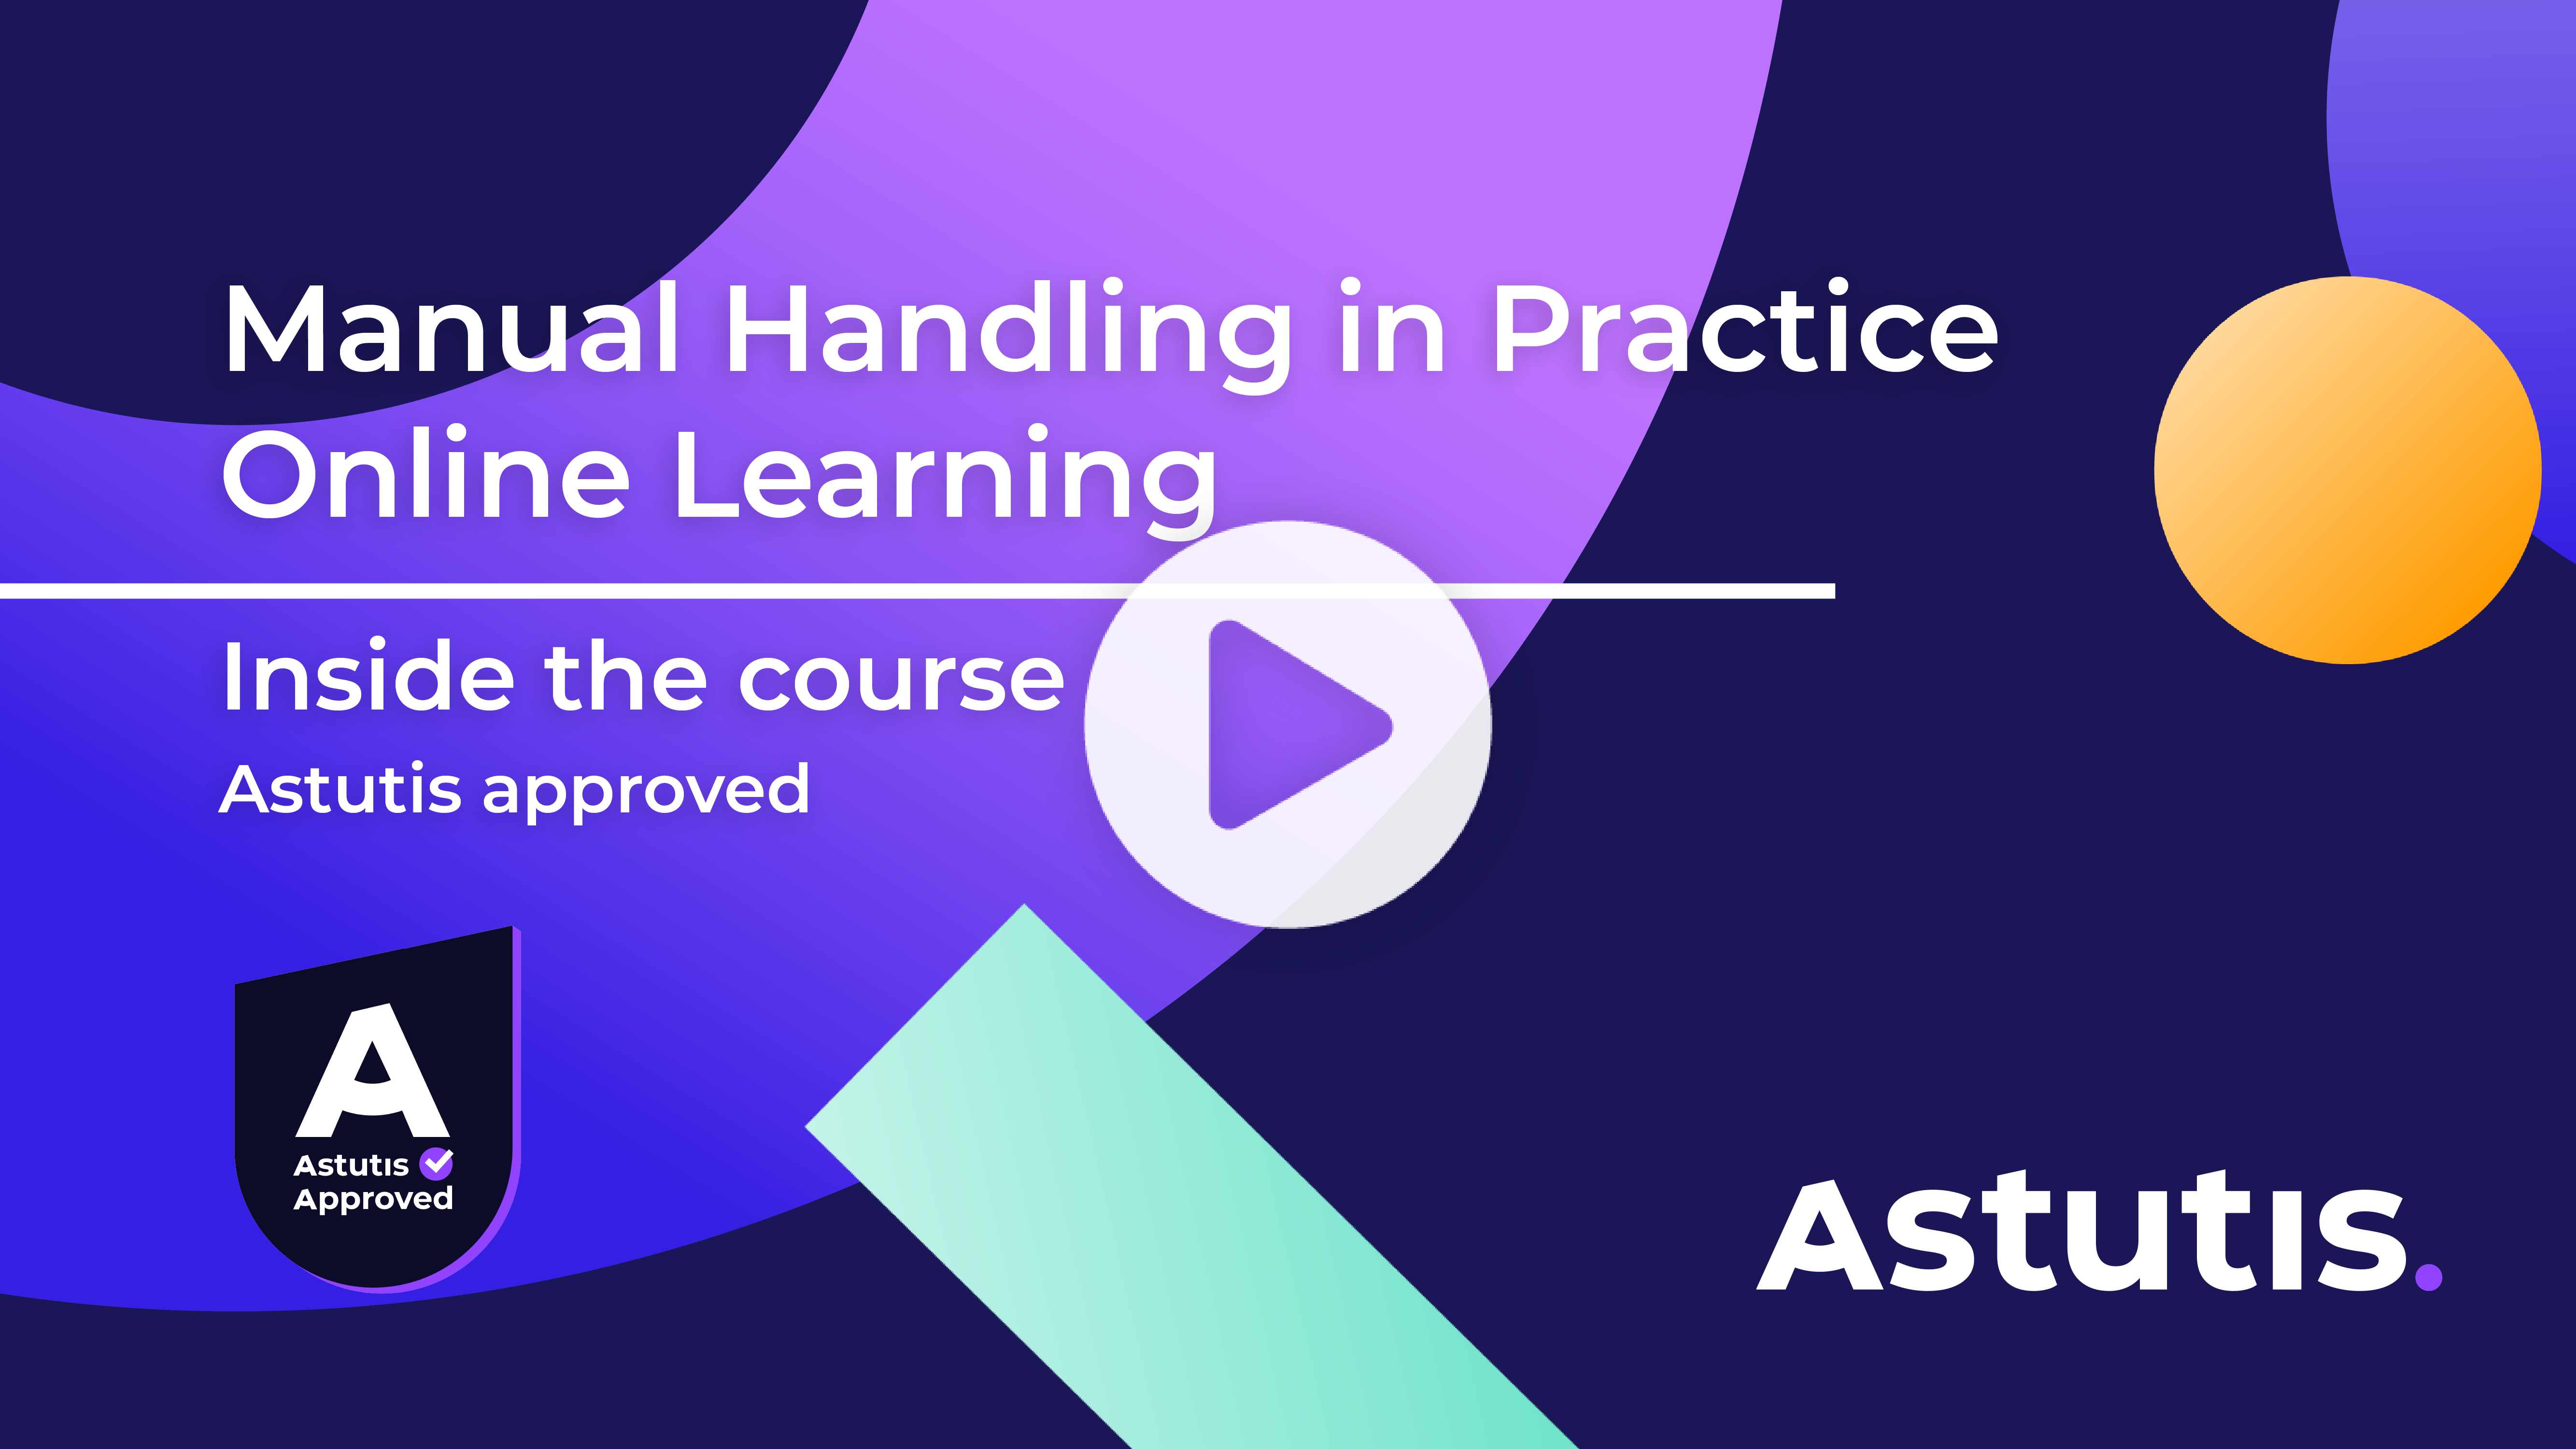 Manual Handling Online Training Course - Inside the Course Preview